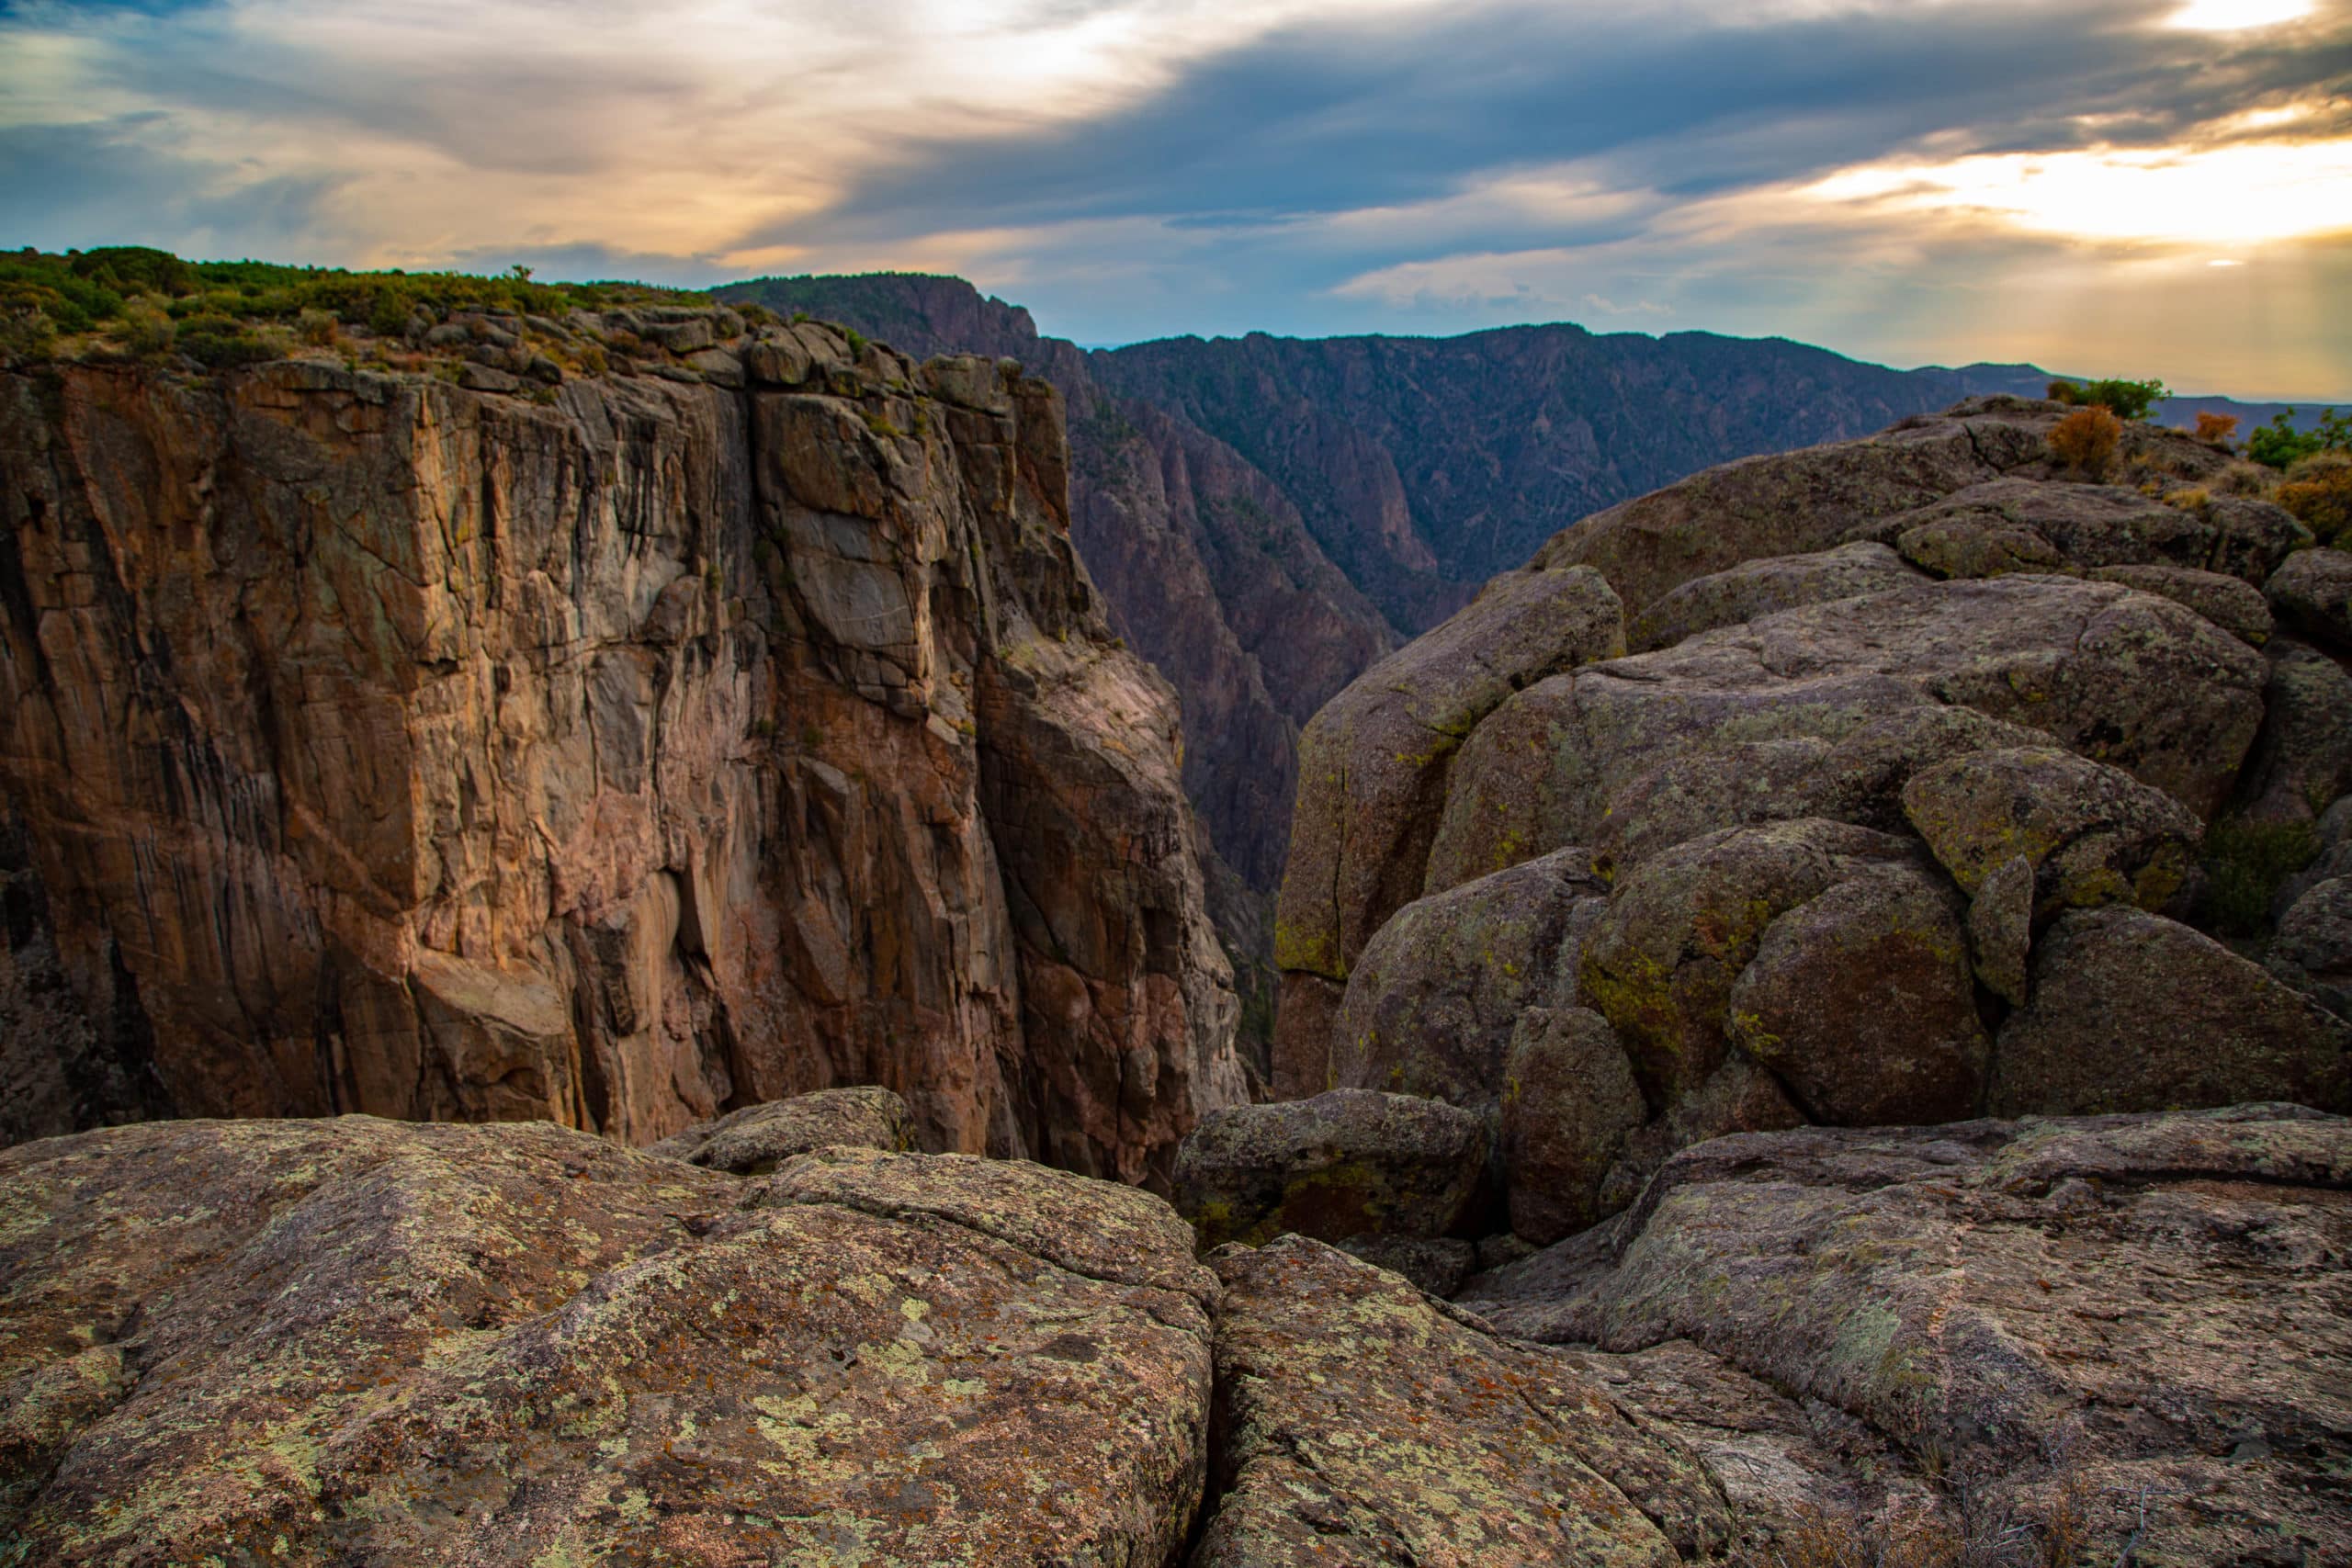 Black Canyon of the Gunnison National Park | Black Canyon of the Gunnison Facts